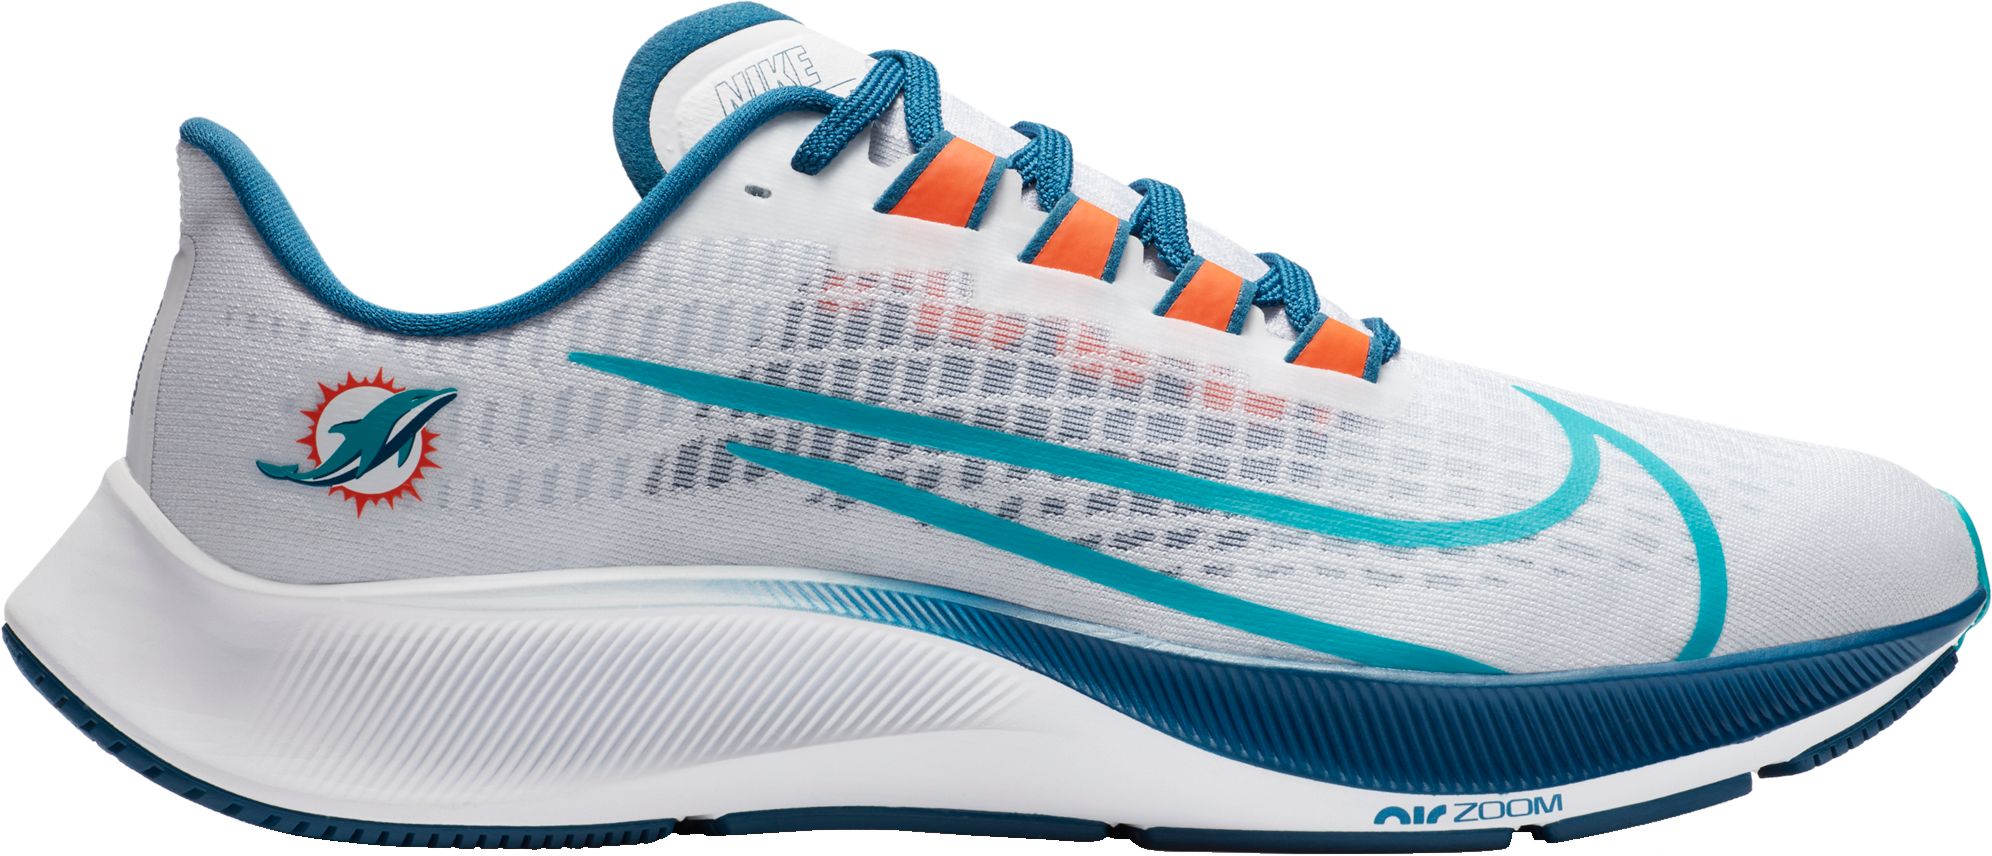 nike dolphins shoes